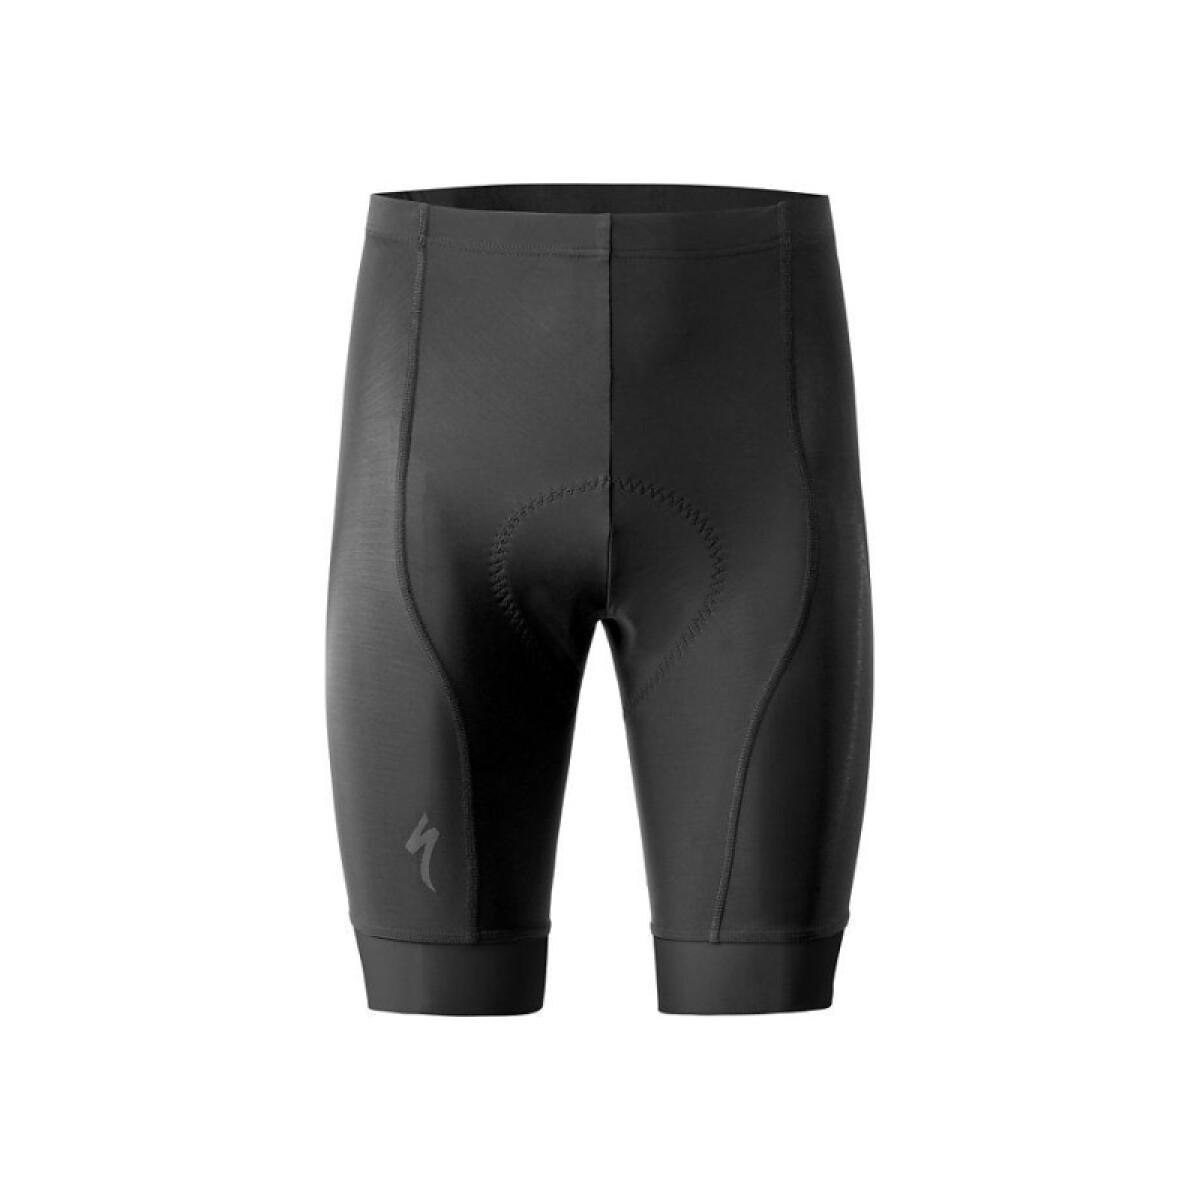 Calza Corta Specialized Rbx Short Blk - Talle Xl 